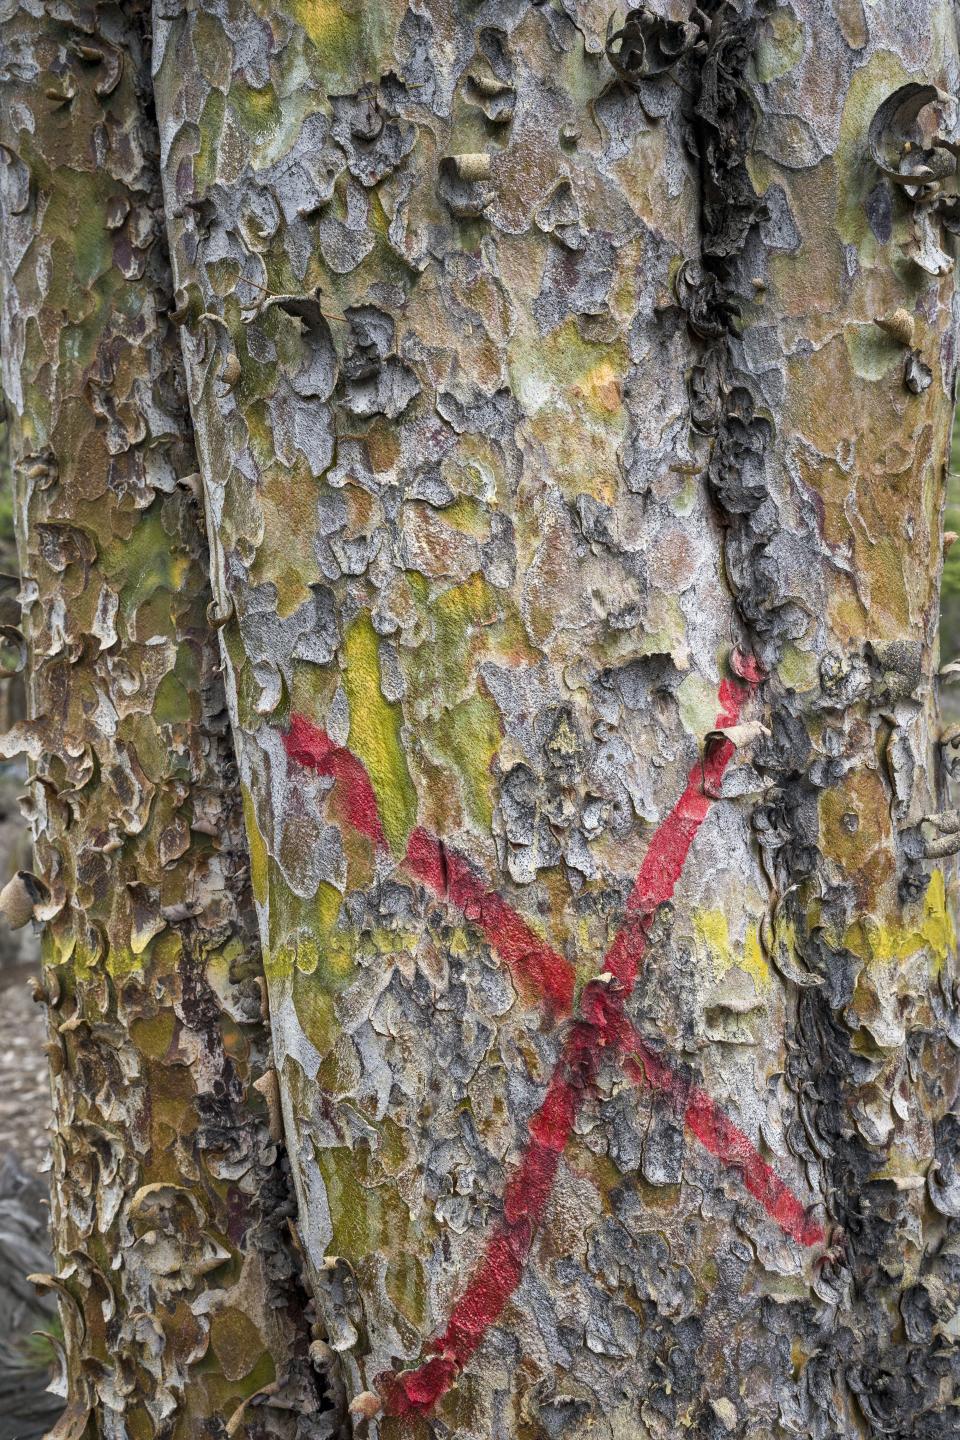 A cross mark is painted on a Chilgoza pine, marked to be felled in Rarang panchayat area to make way for a pylon for the Tidong Hydropower Project In Kinnaur district of the Himalayan state of Himachal Pradesh, India, Monday, March 13, 2023. Thousands of trees, including the rare Chilgoza pine whose nuts are prized and provide valuable income for local communities, are being cut to make way for construction. (AP Photo/Ashwini Bhatia)